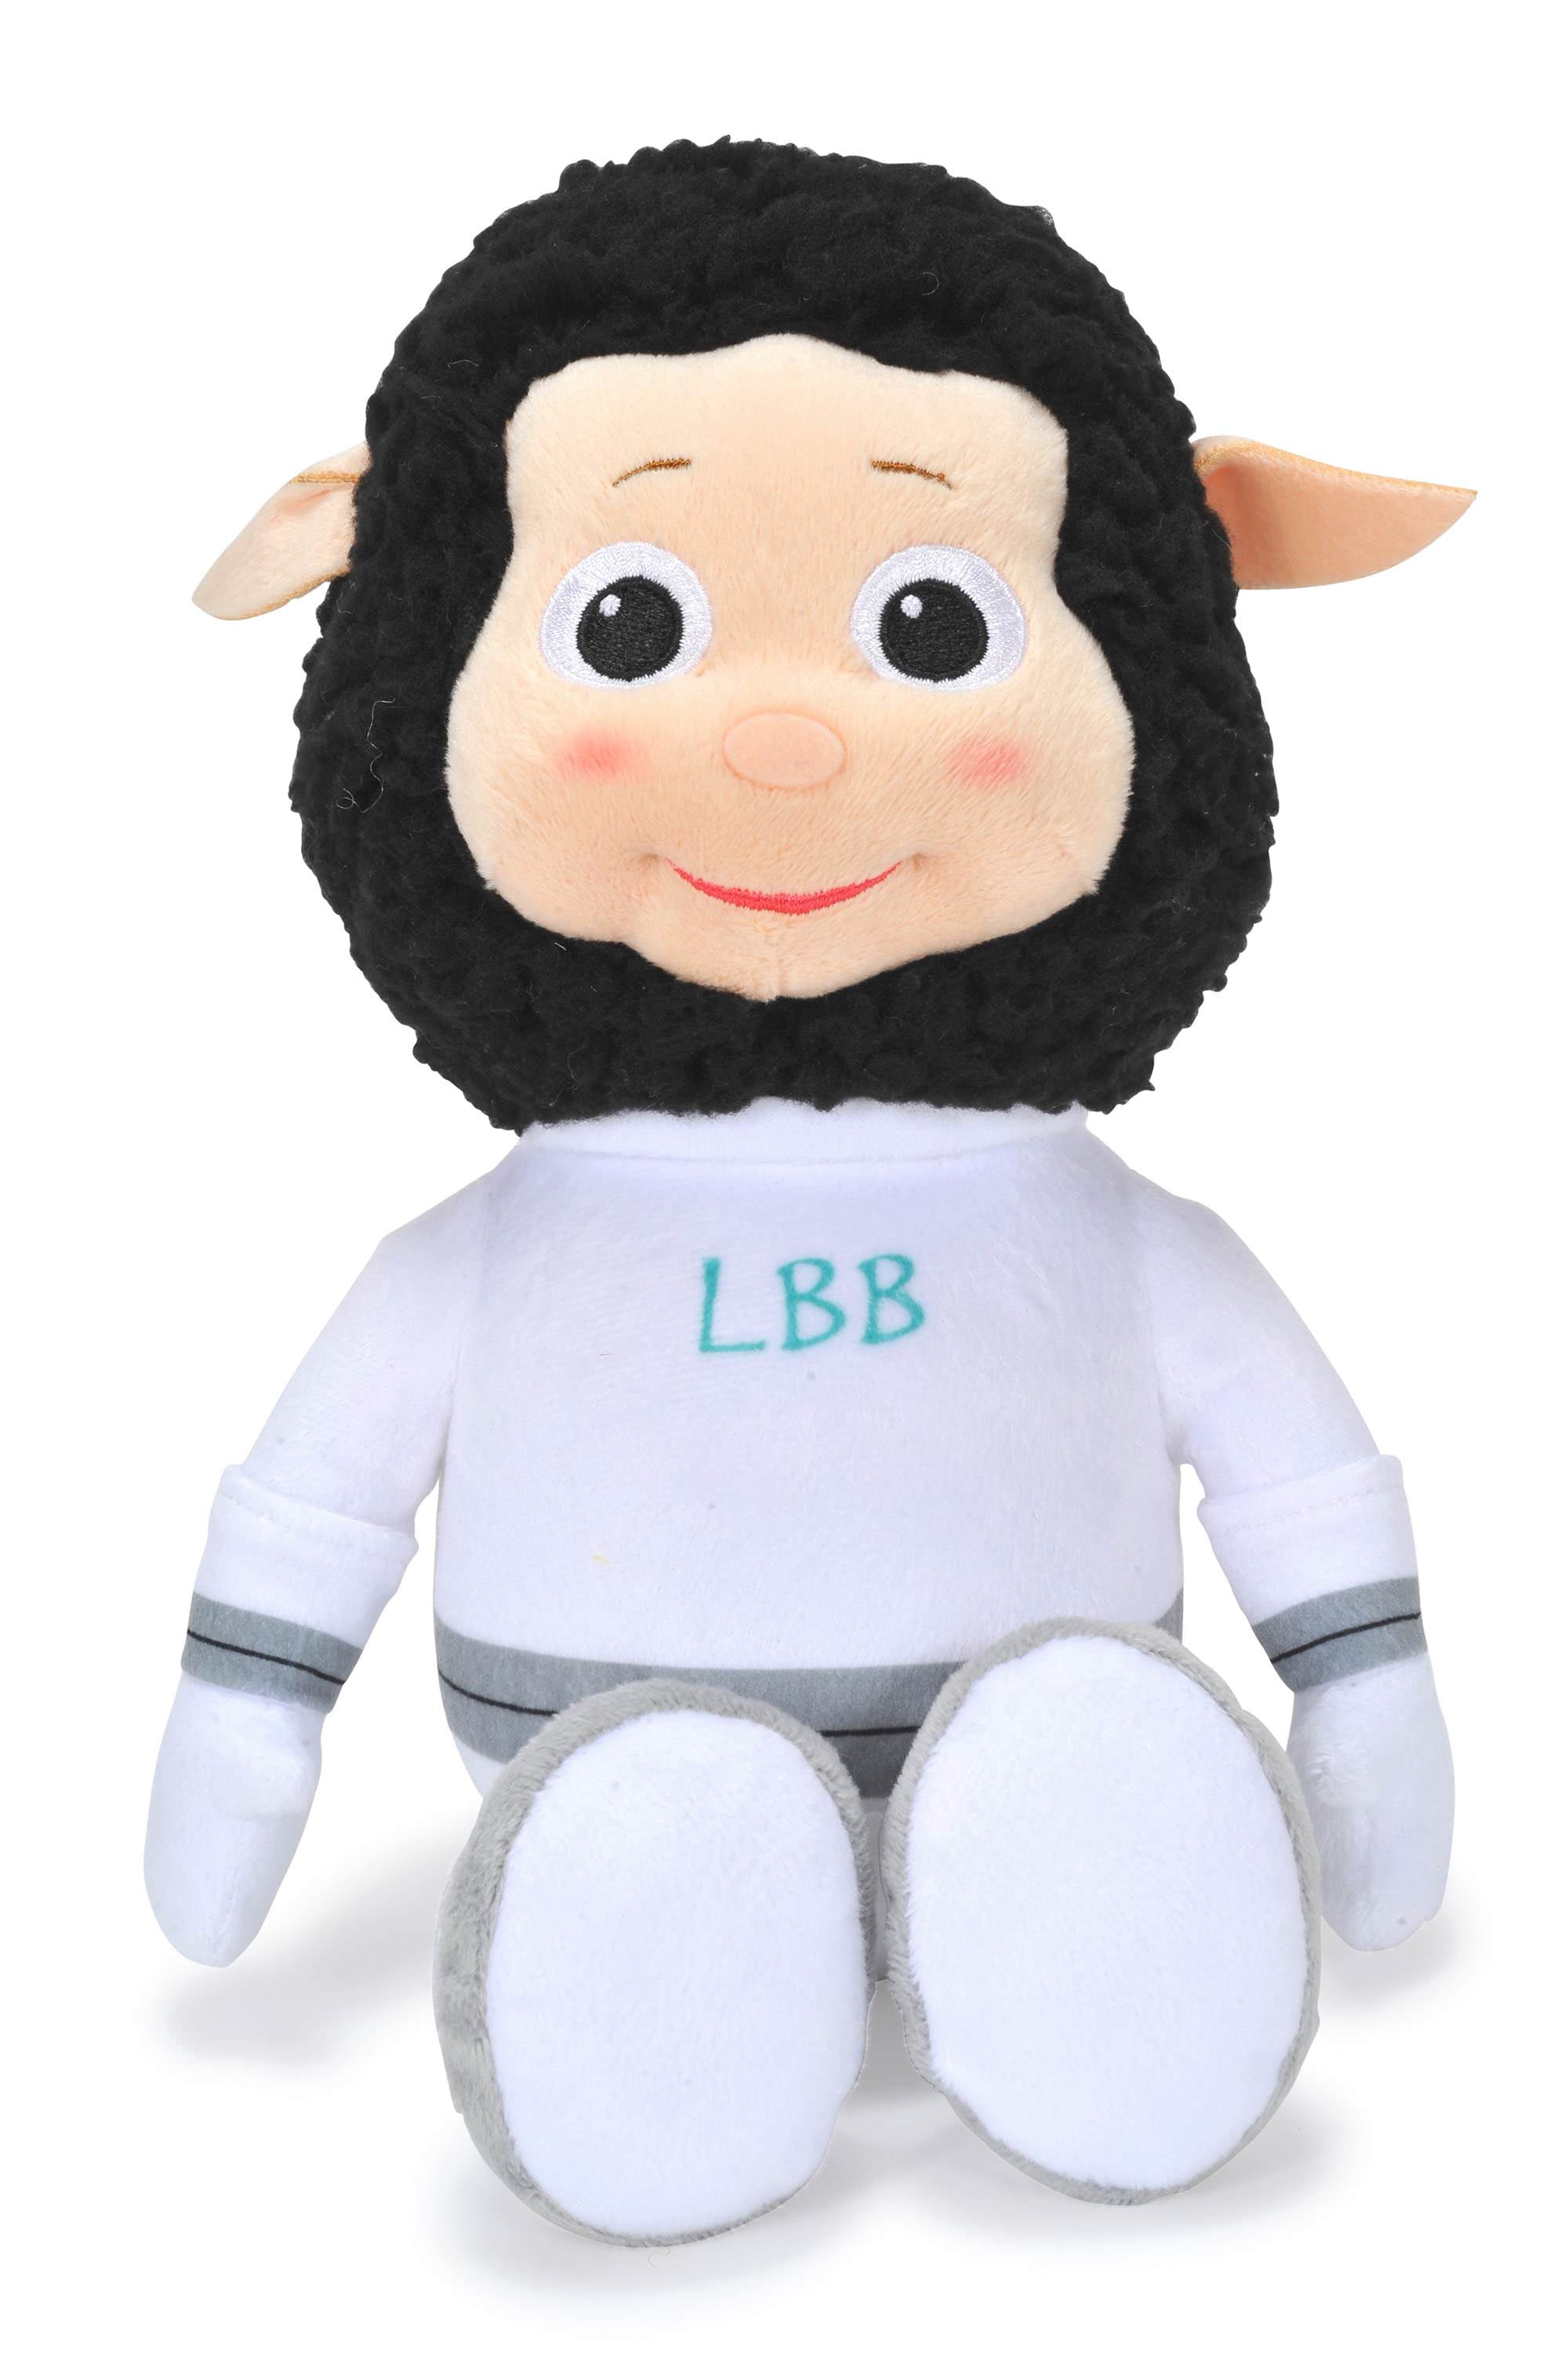 Little Baby Bum Official Plush Sheep Star Wheels on Bus Pig Cow Soft Toys 9" 